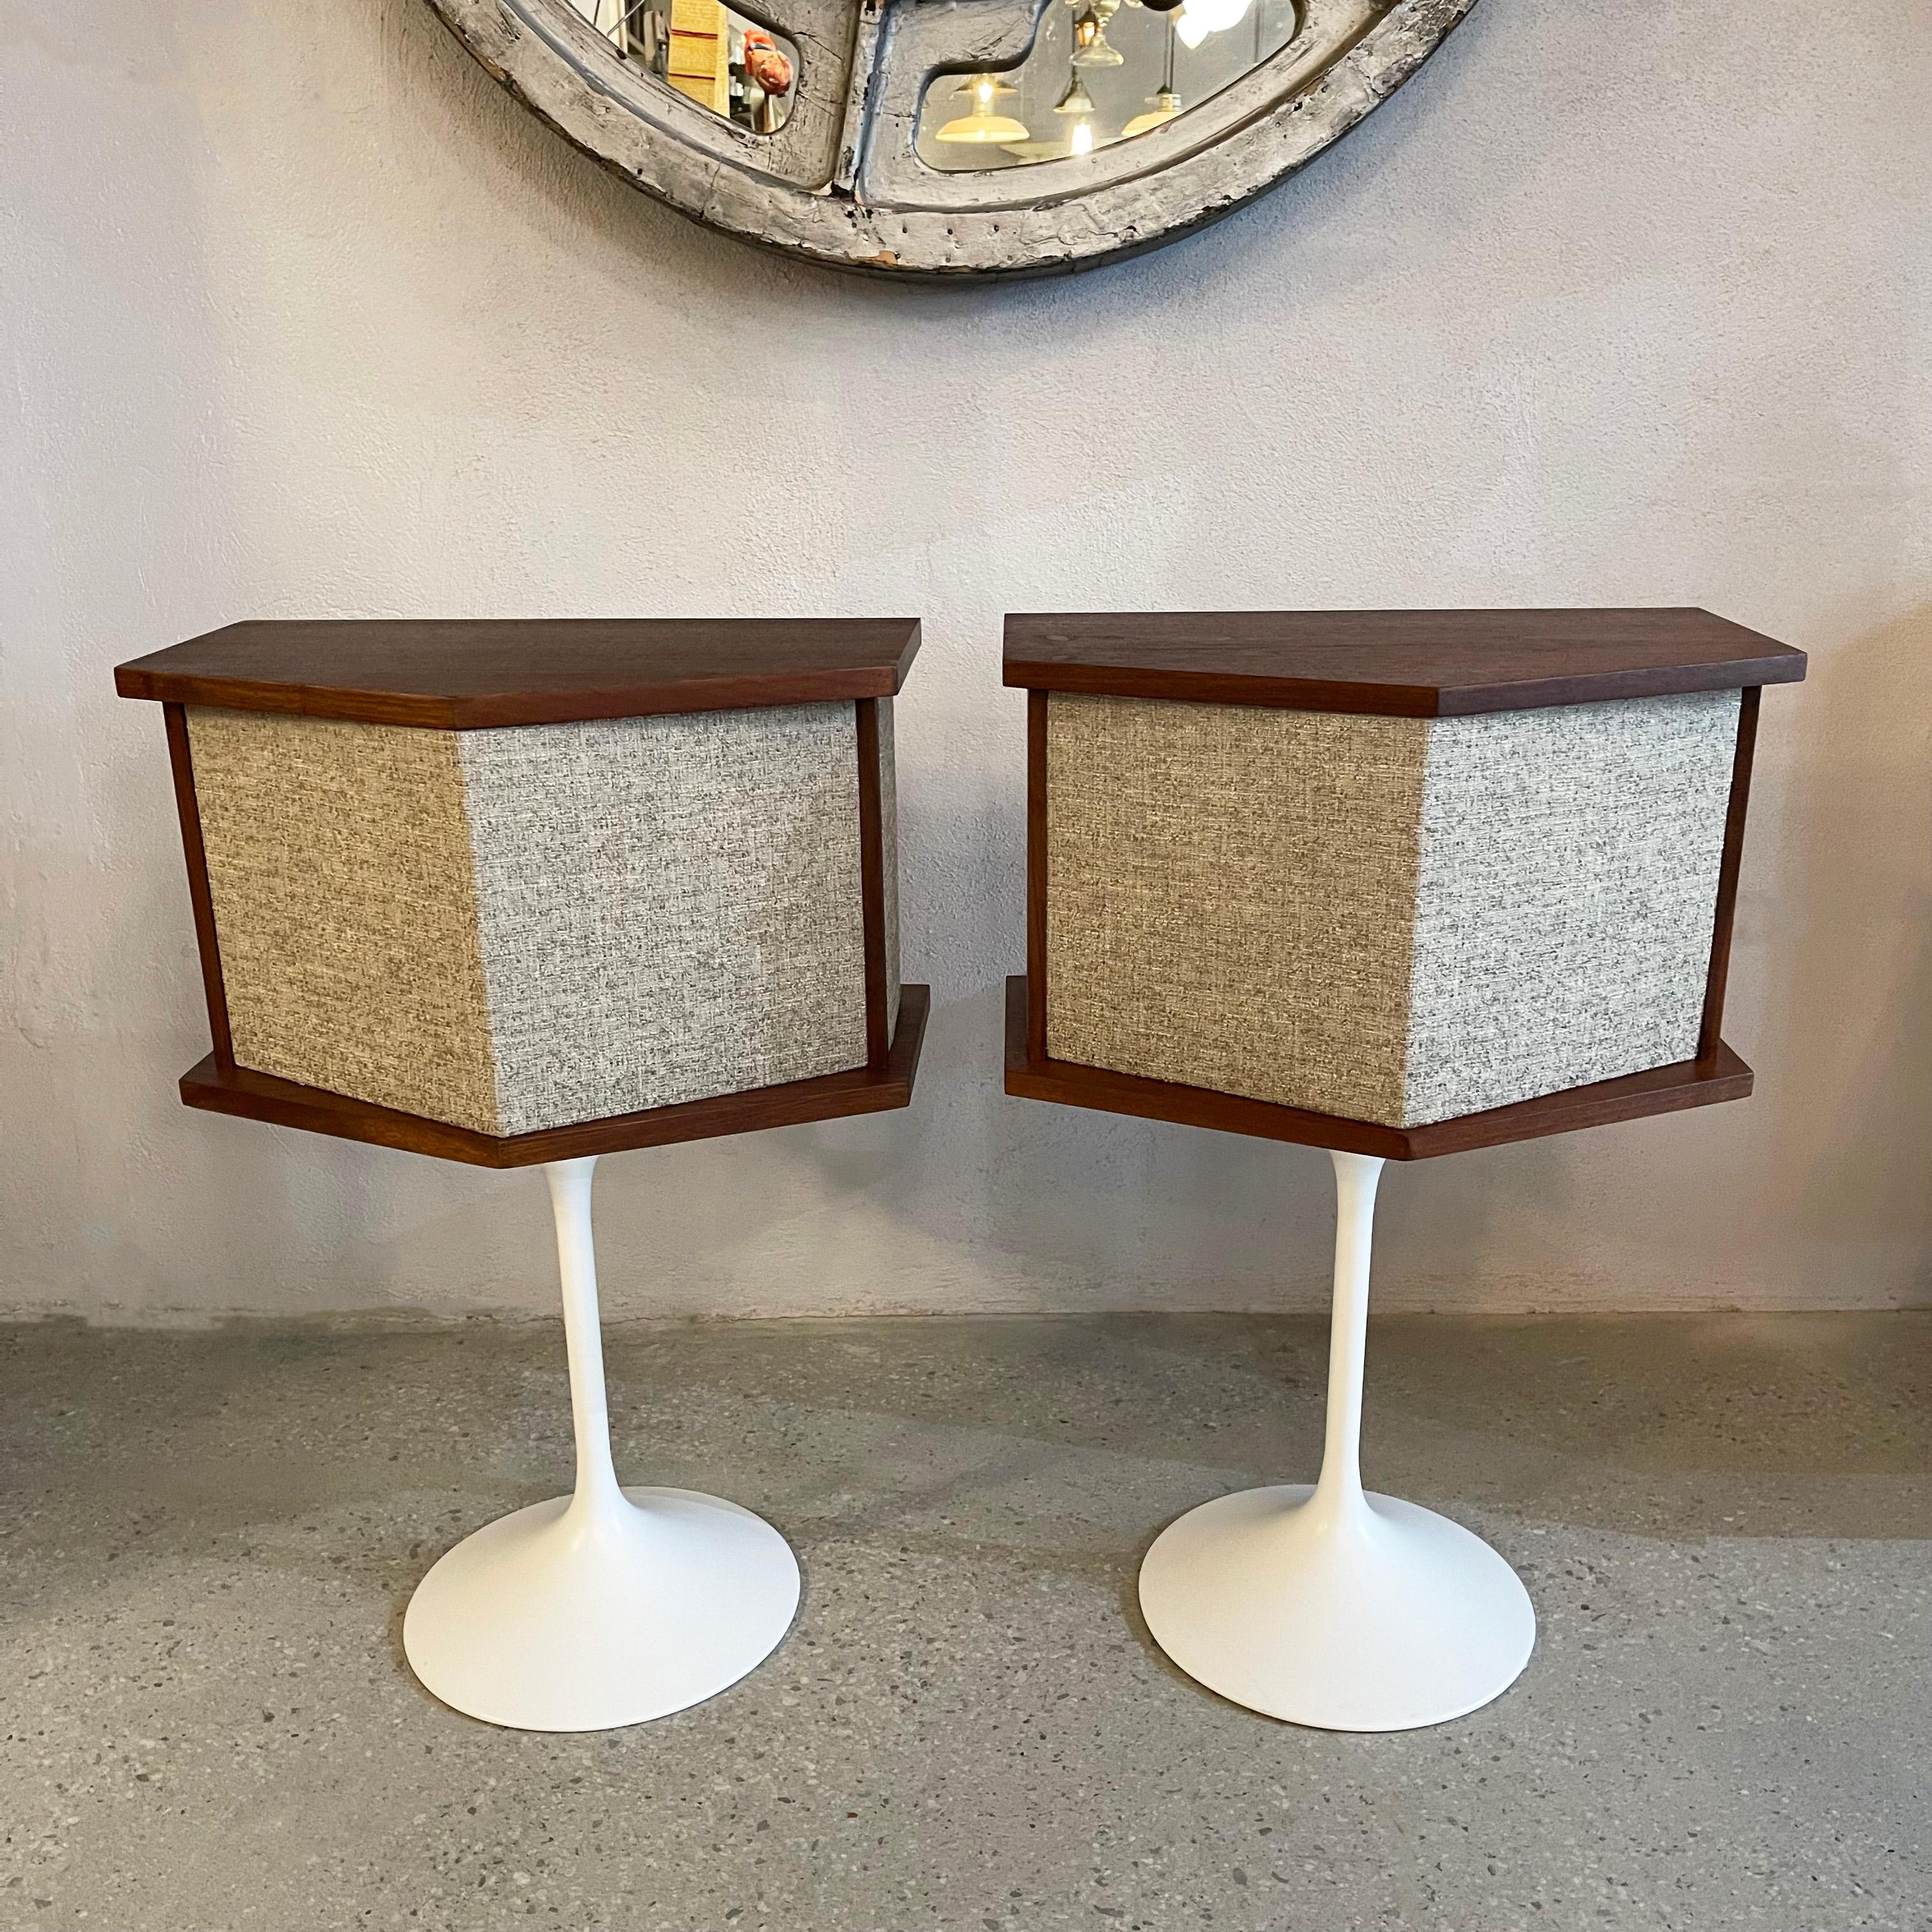 Pair of newly finished and upholstered, mid-century modern, Bose 901 series speakers on tulip base stands designed by the Finnish-American designer and architect Eero Saarinen, circa 1968. The speakers feature walnut frames with oatmeal beige tweed